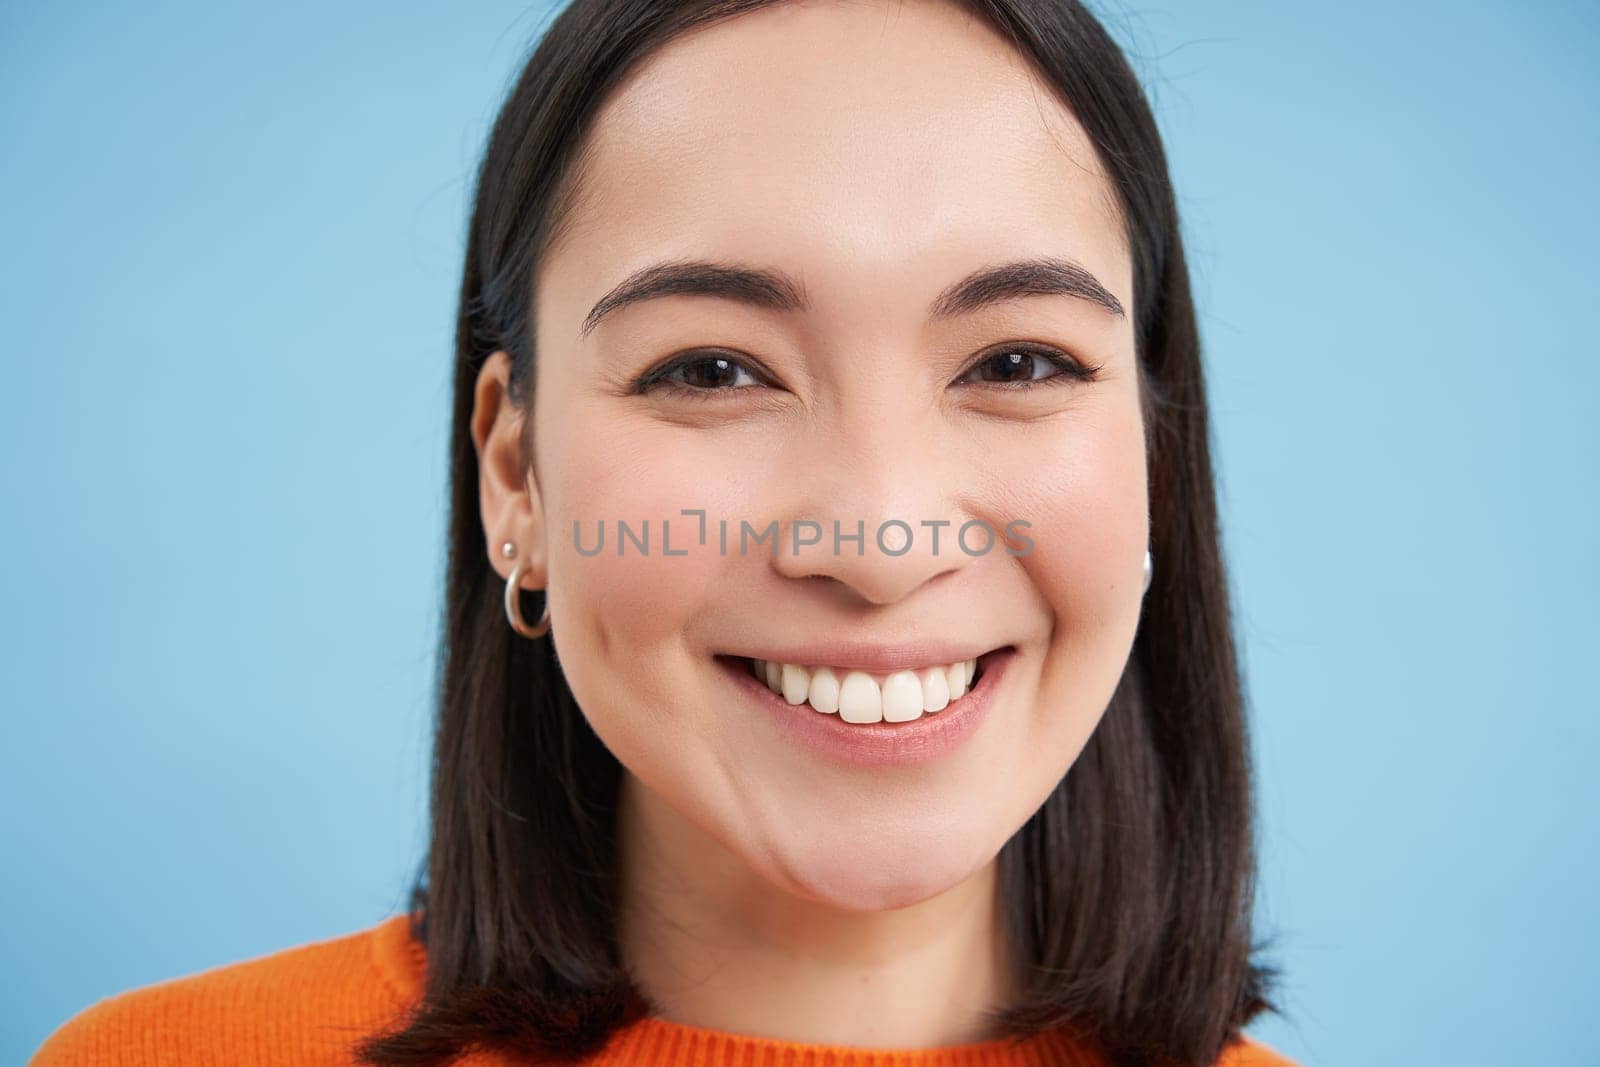 Beauty and wellbeing. Close up portrait of young happy asian woman, smiling and showing candid emotions, standing over blue background.